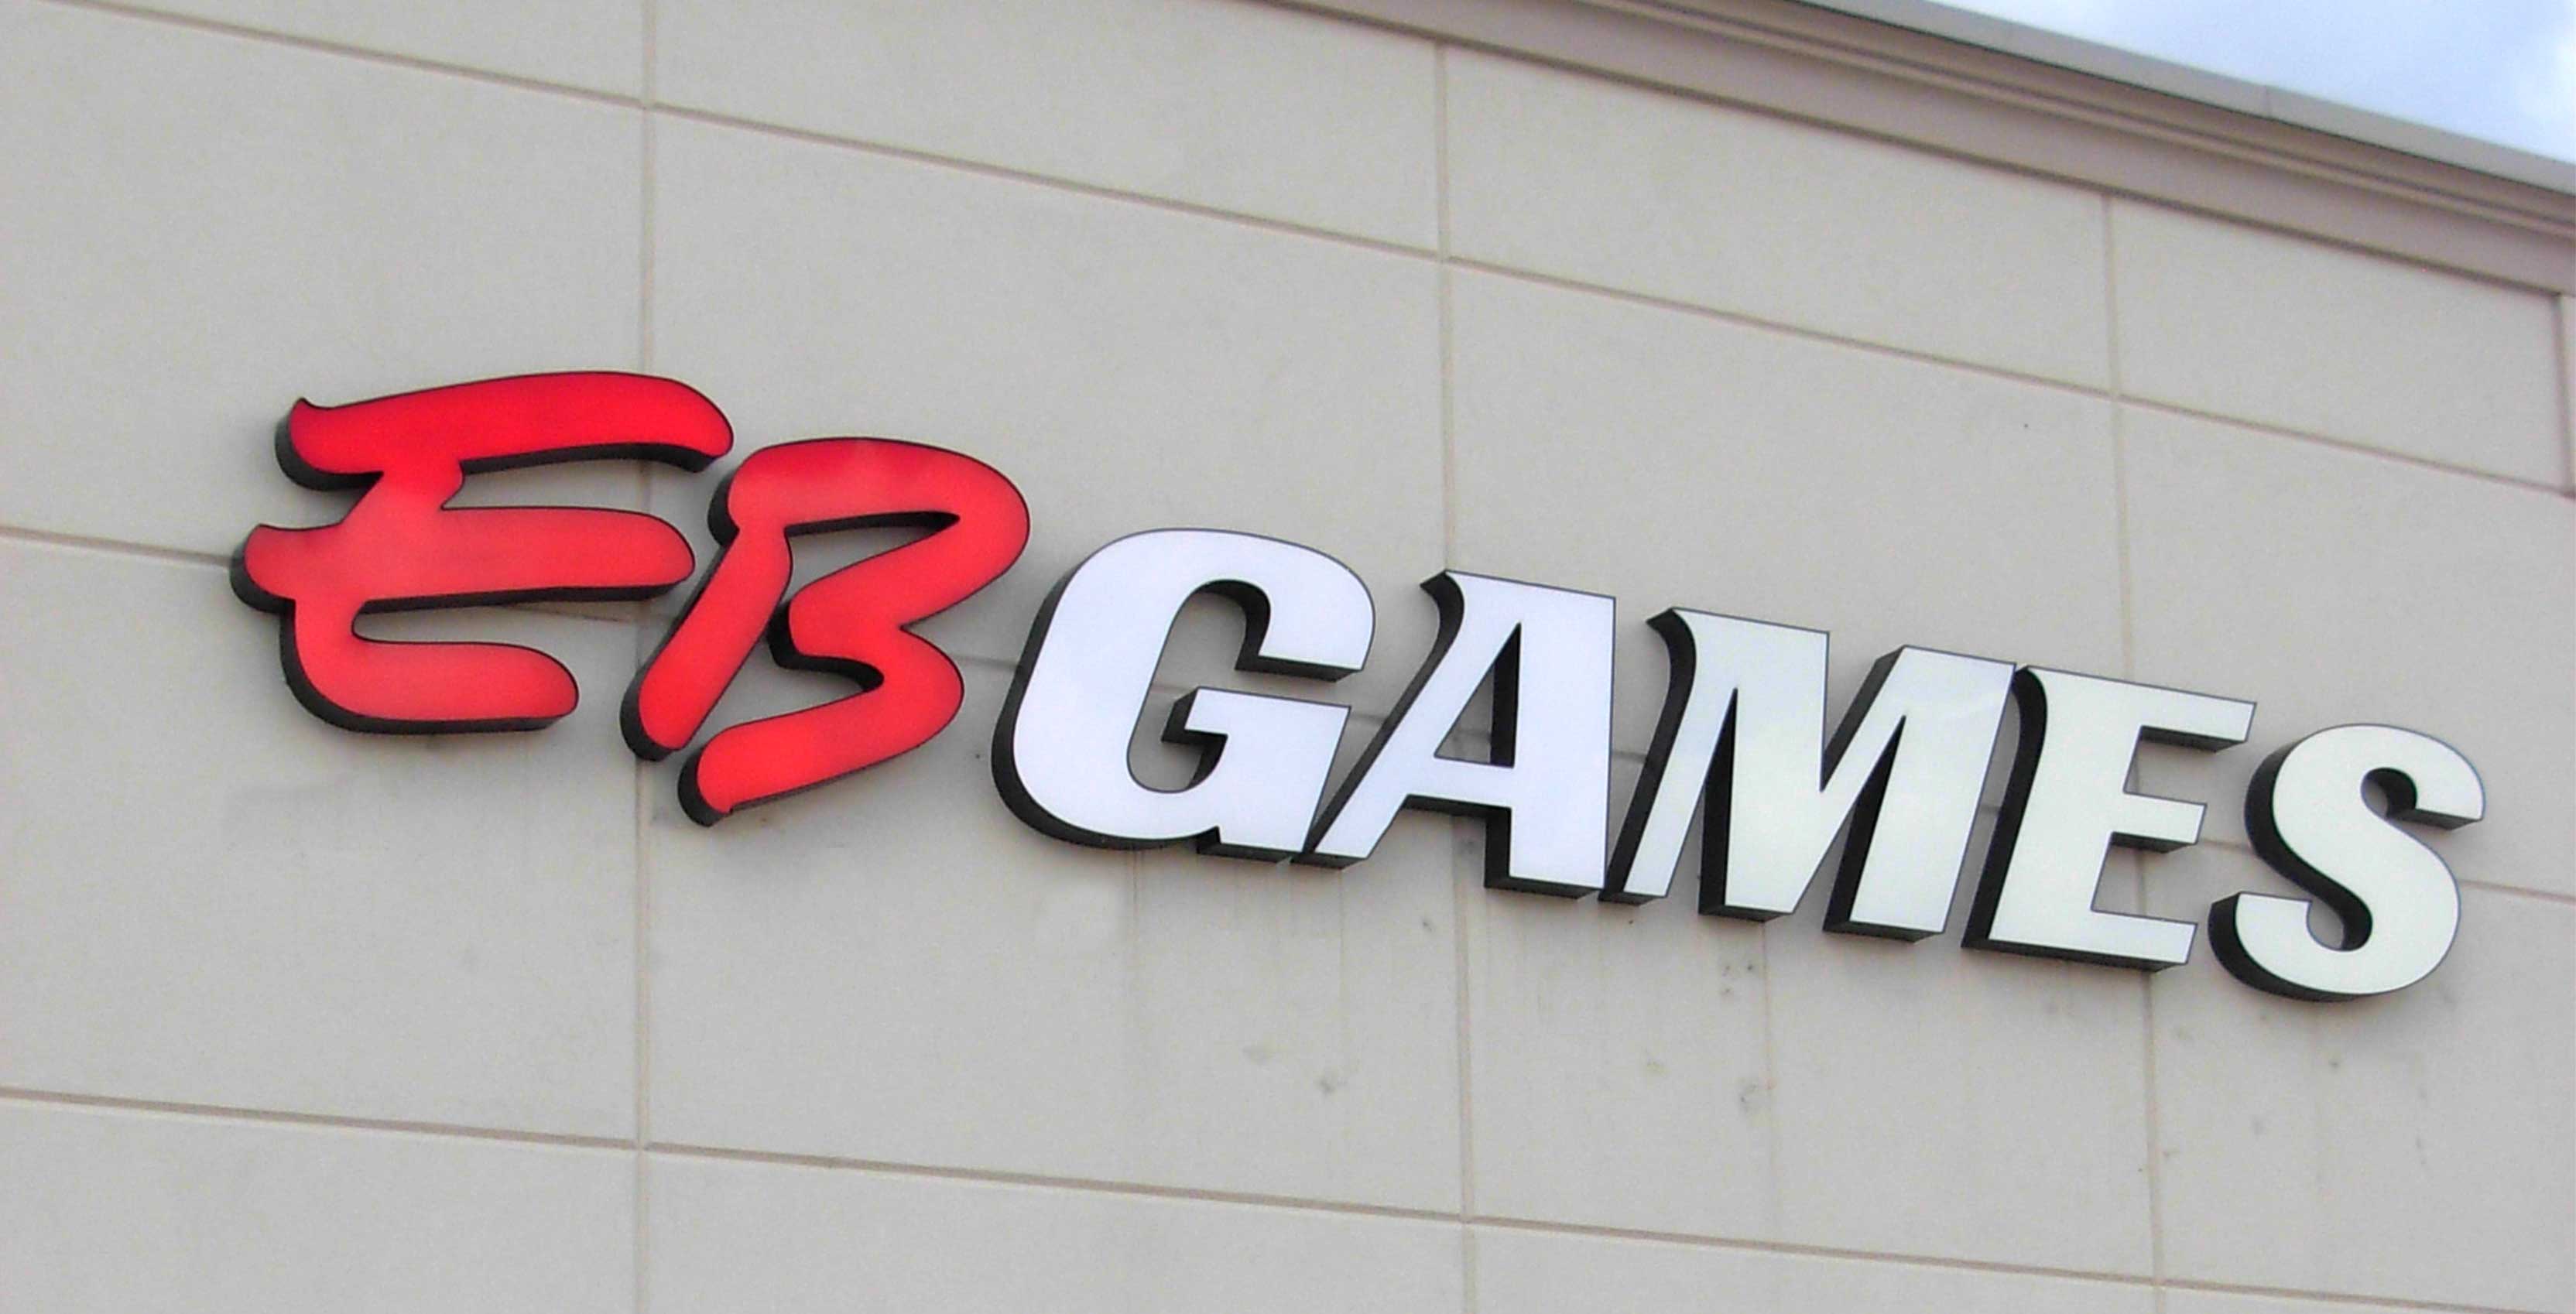 EB Games logo on building